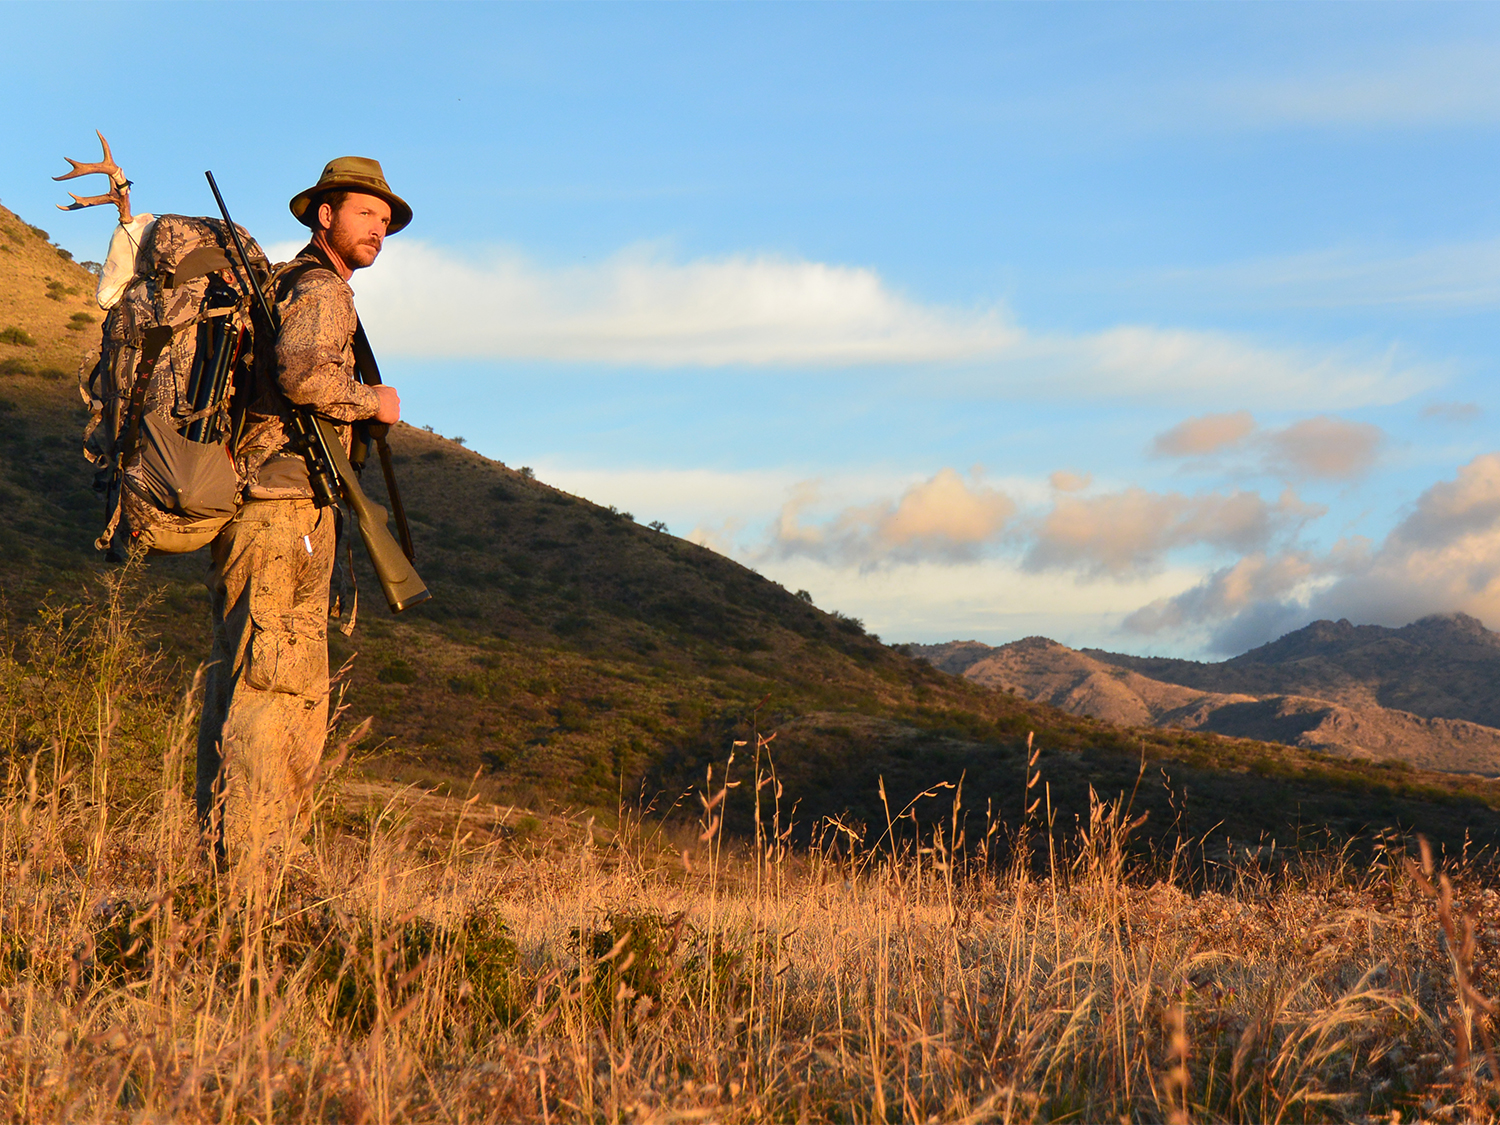 A man with a rifle and backpack in a large hillside.